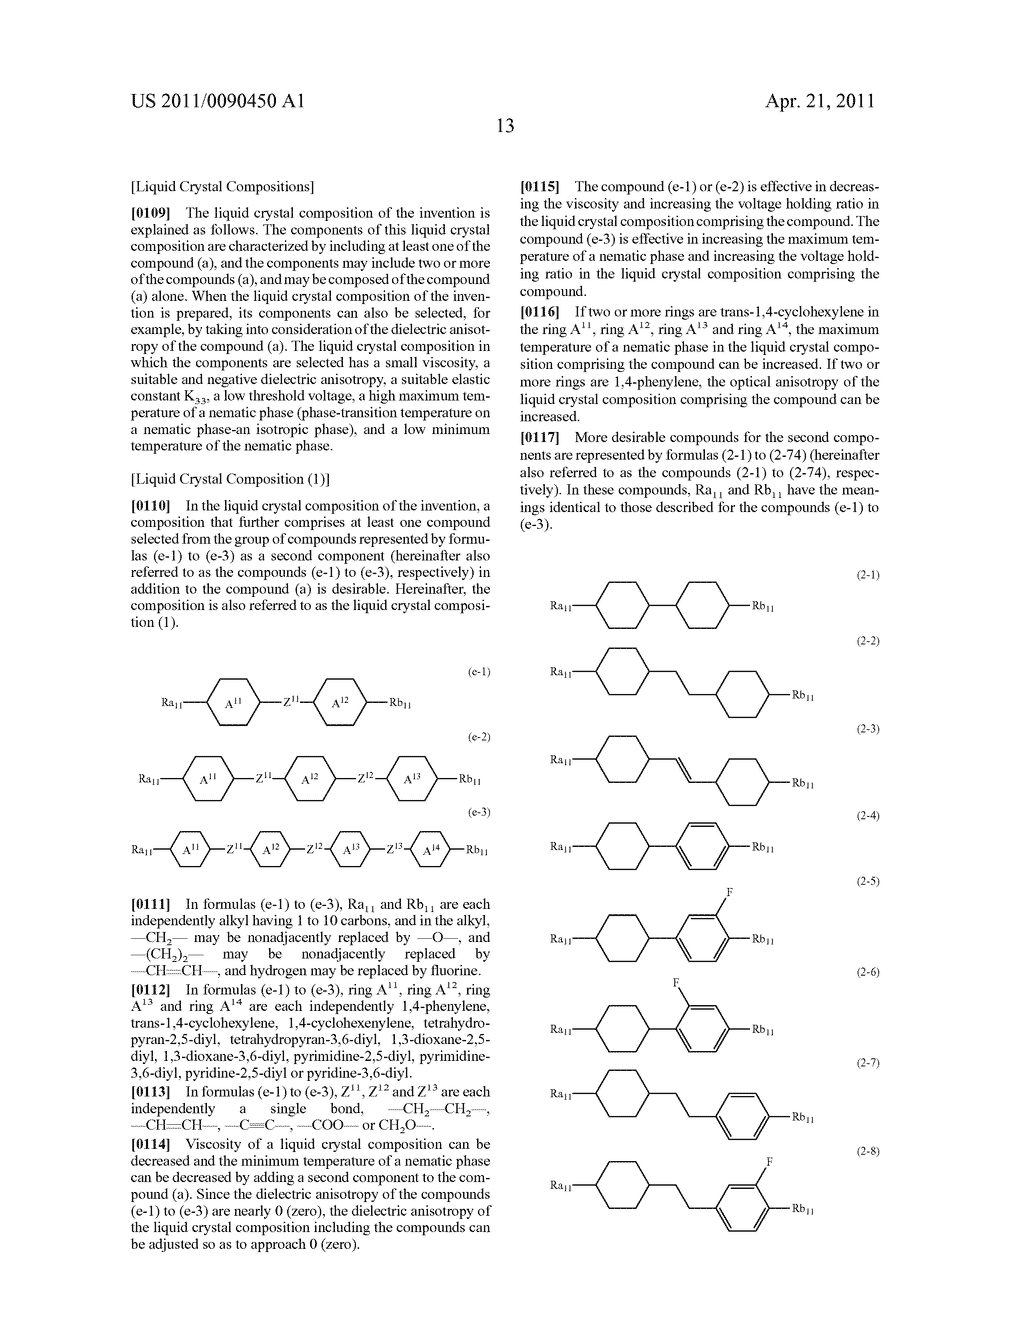 FOUR-RING LIQUID CRYSTAL COMPOUND HAVING LATERAL FLUORINE, LIQUID CRYSTAL COMPOSITION AND LIQUID CRYSTAL DISPLAY DEVICE - diagram, schematic, and image 14